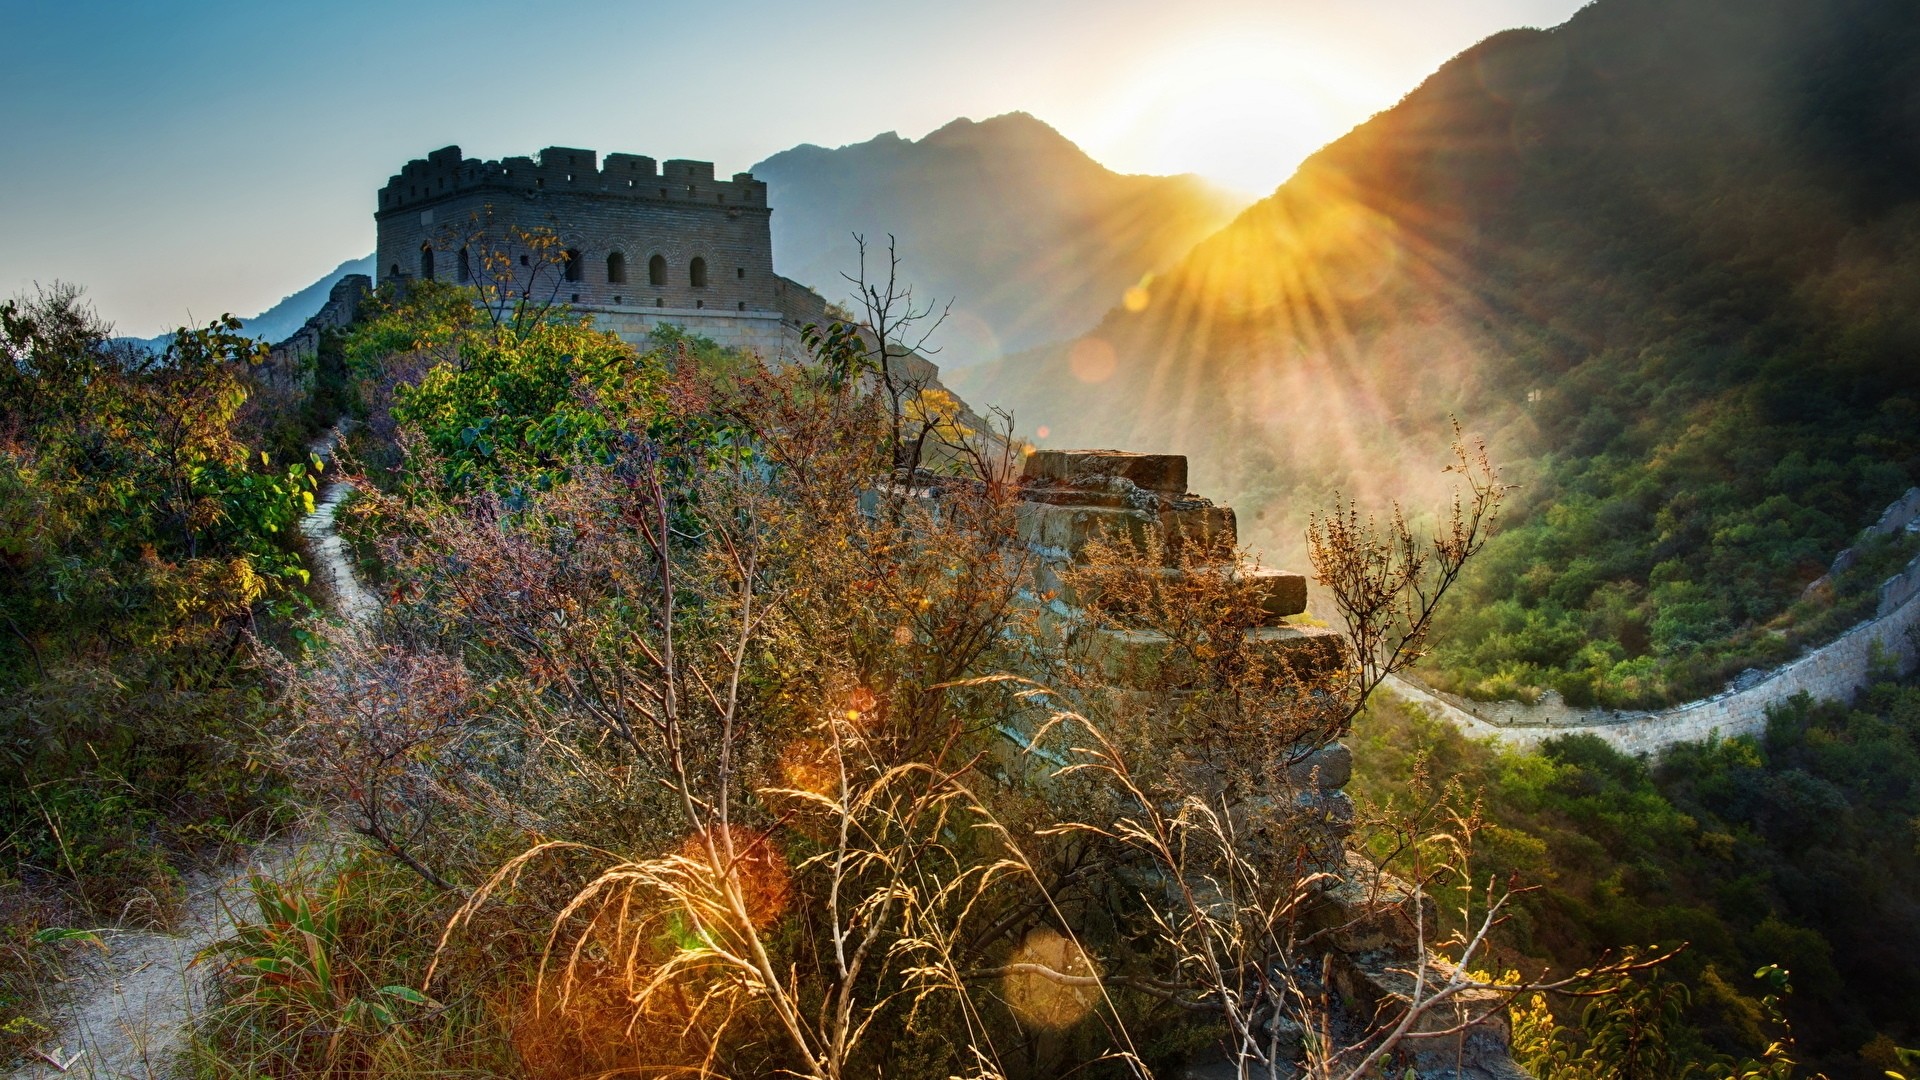 Great Wall Of China wallpaper for pc